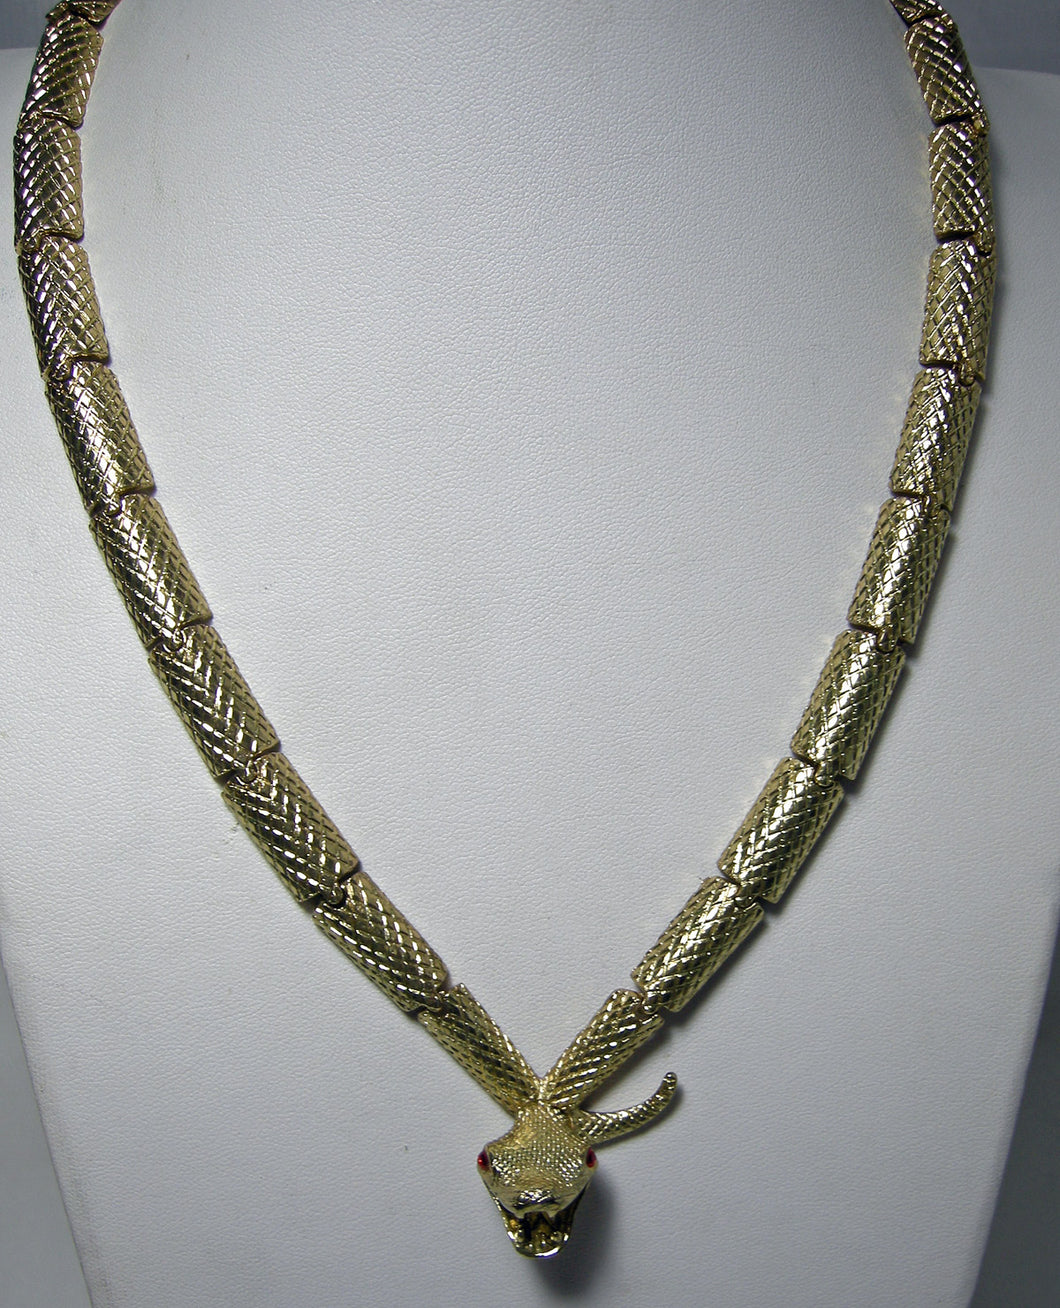 Vintage Gold Tone Articulated Snake Head Necklace  - JD10502